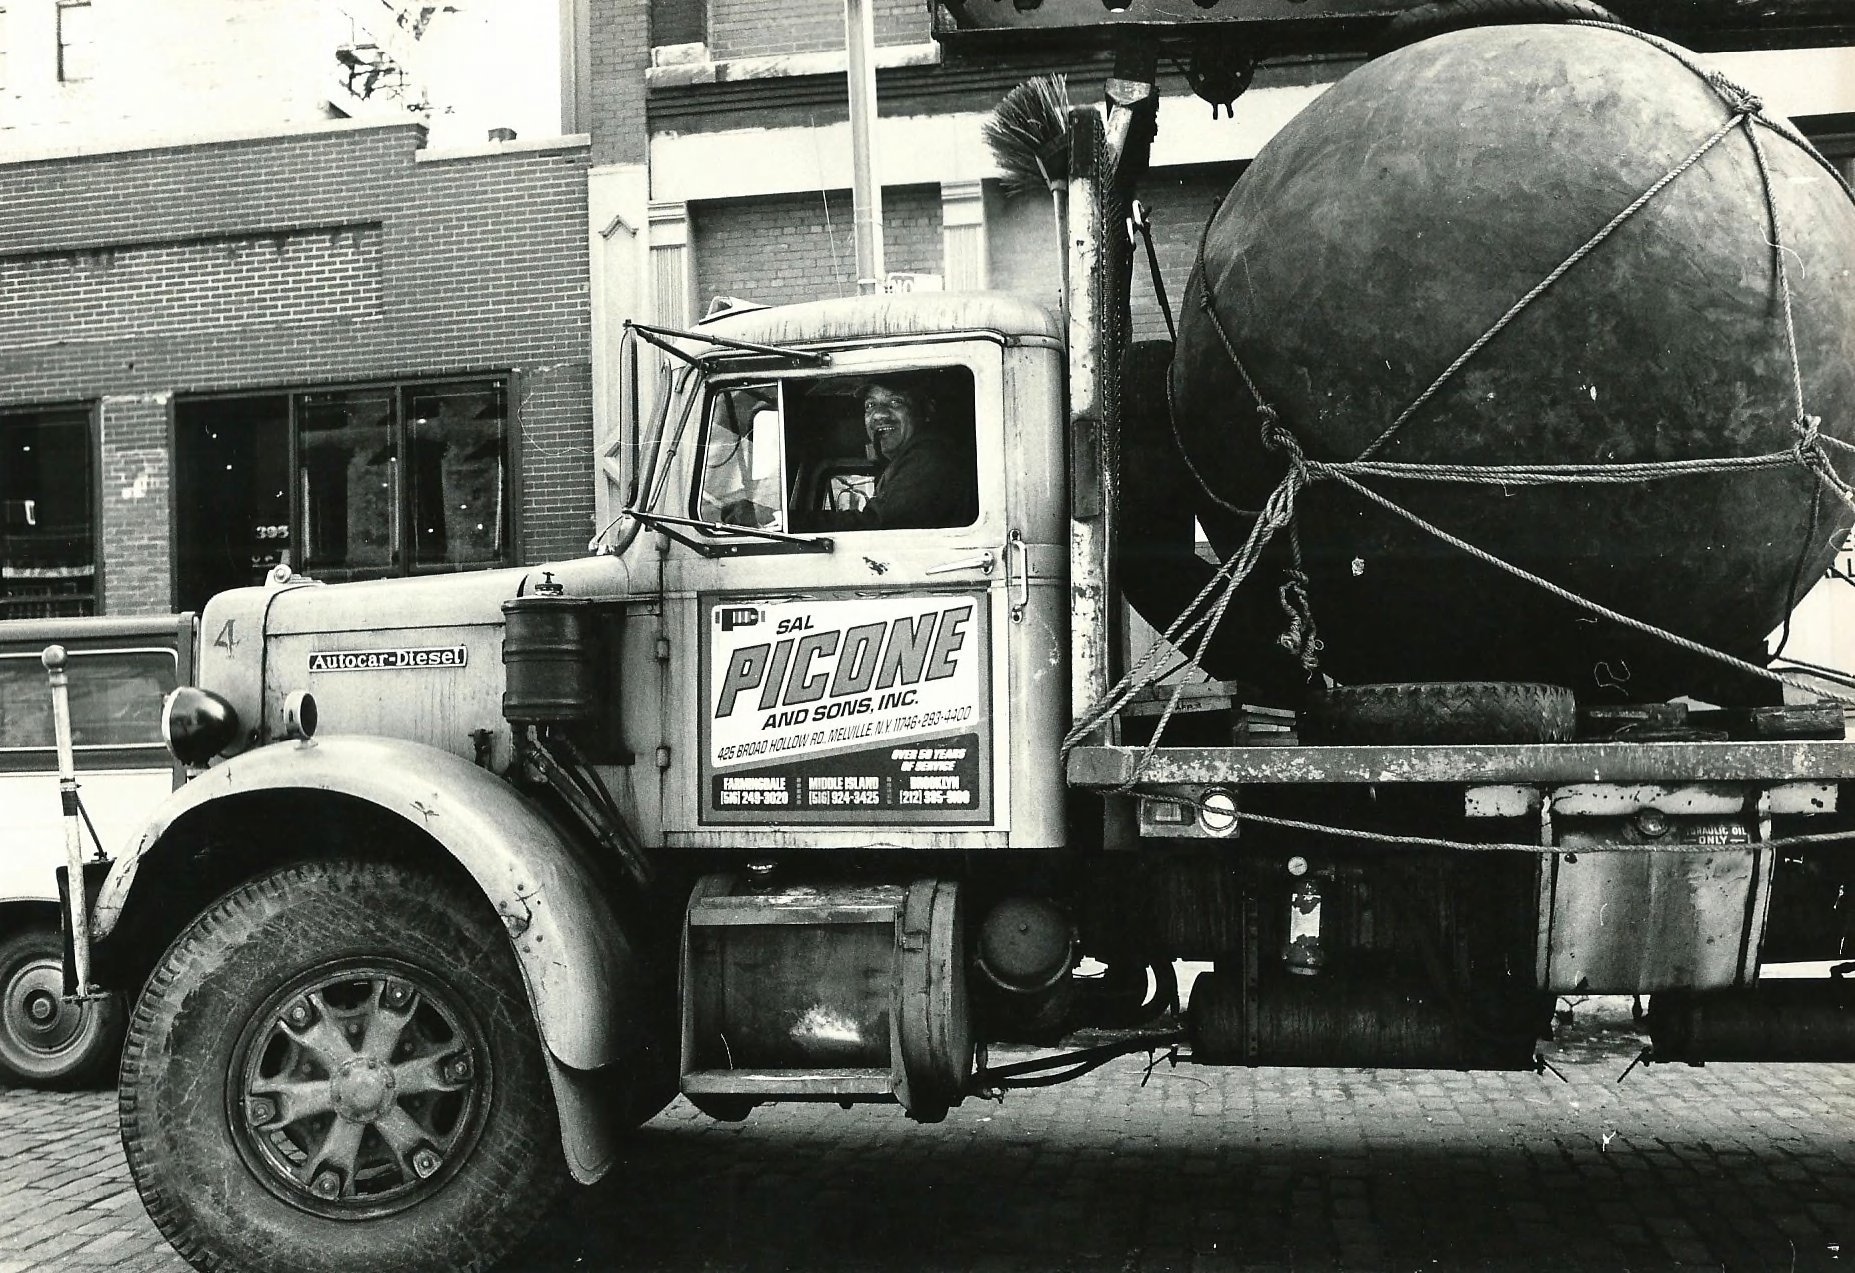 Photograph of Black Sphere being transported via truck